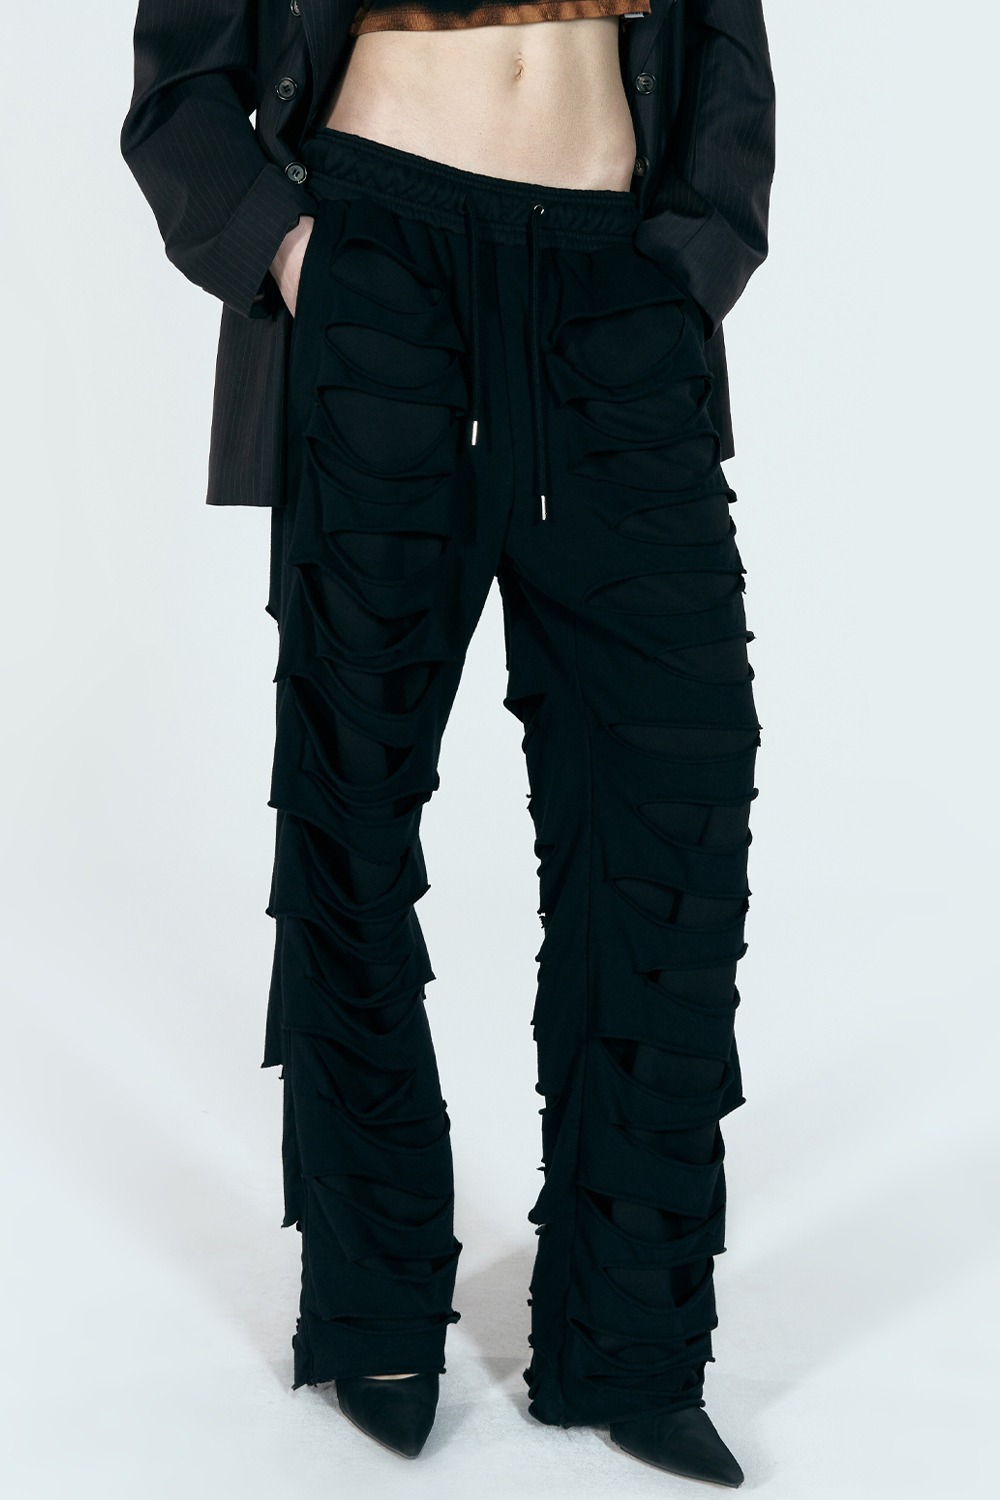 [Runway] Double Layered Cut-out Sweat pants